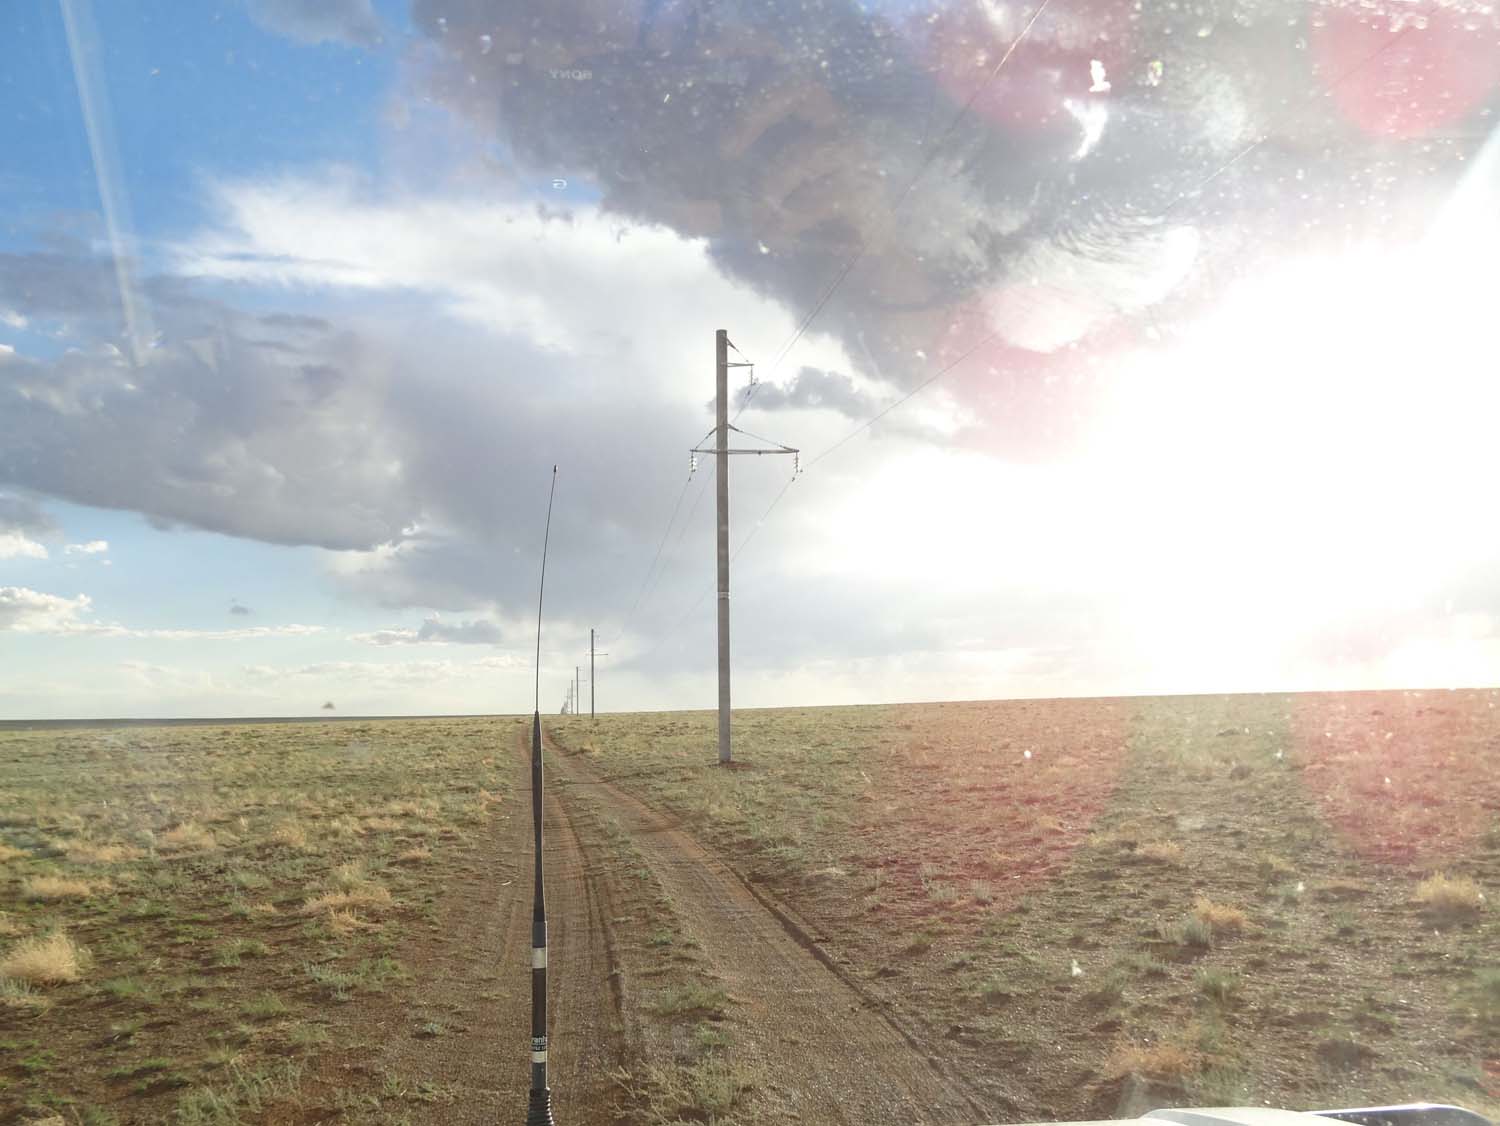 following the tracks next to the telegraph lines in the Gobi